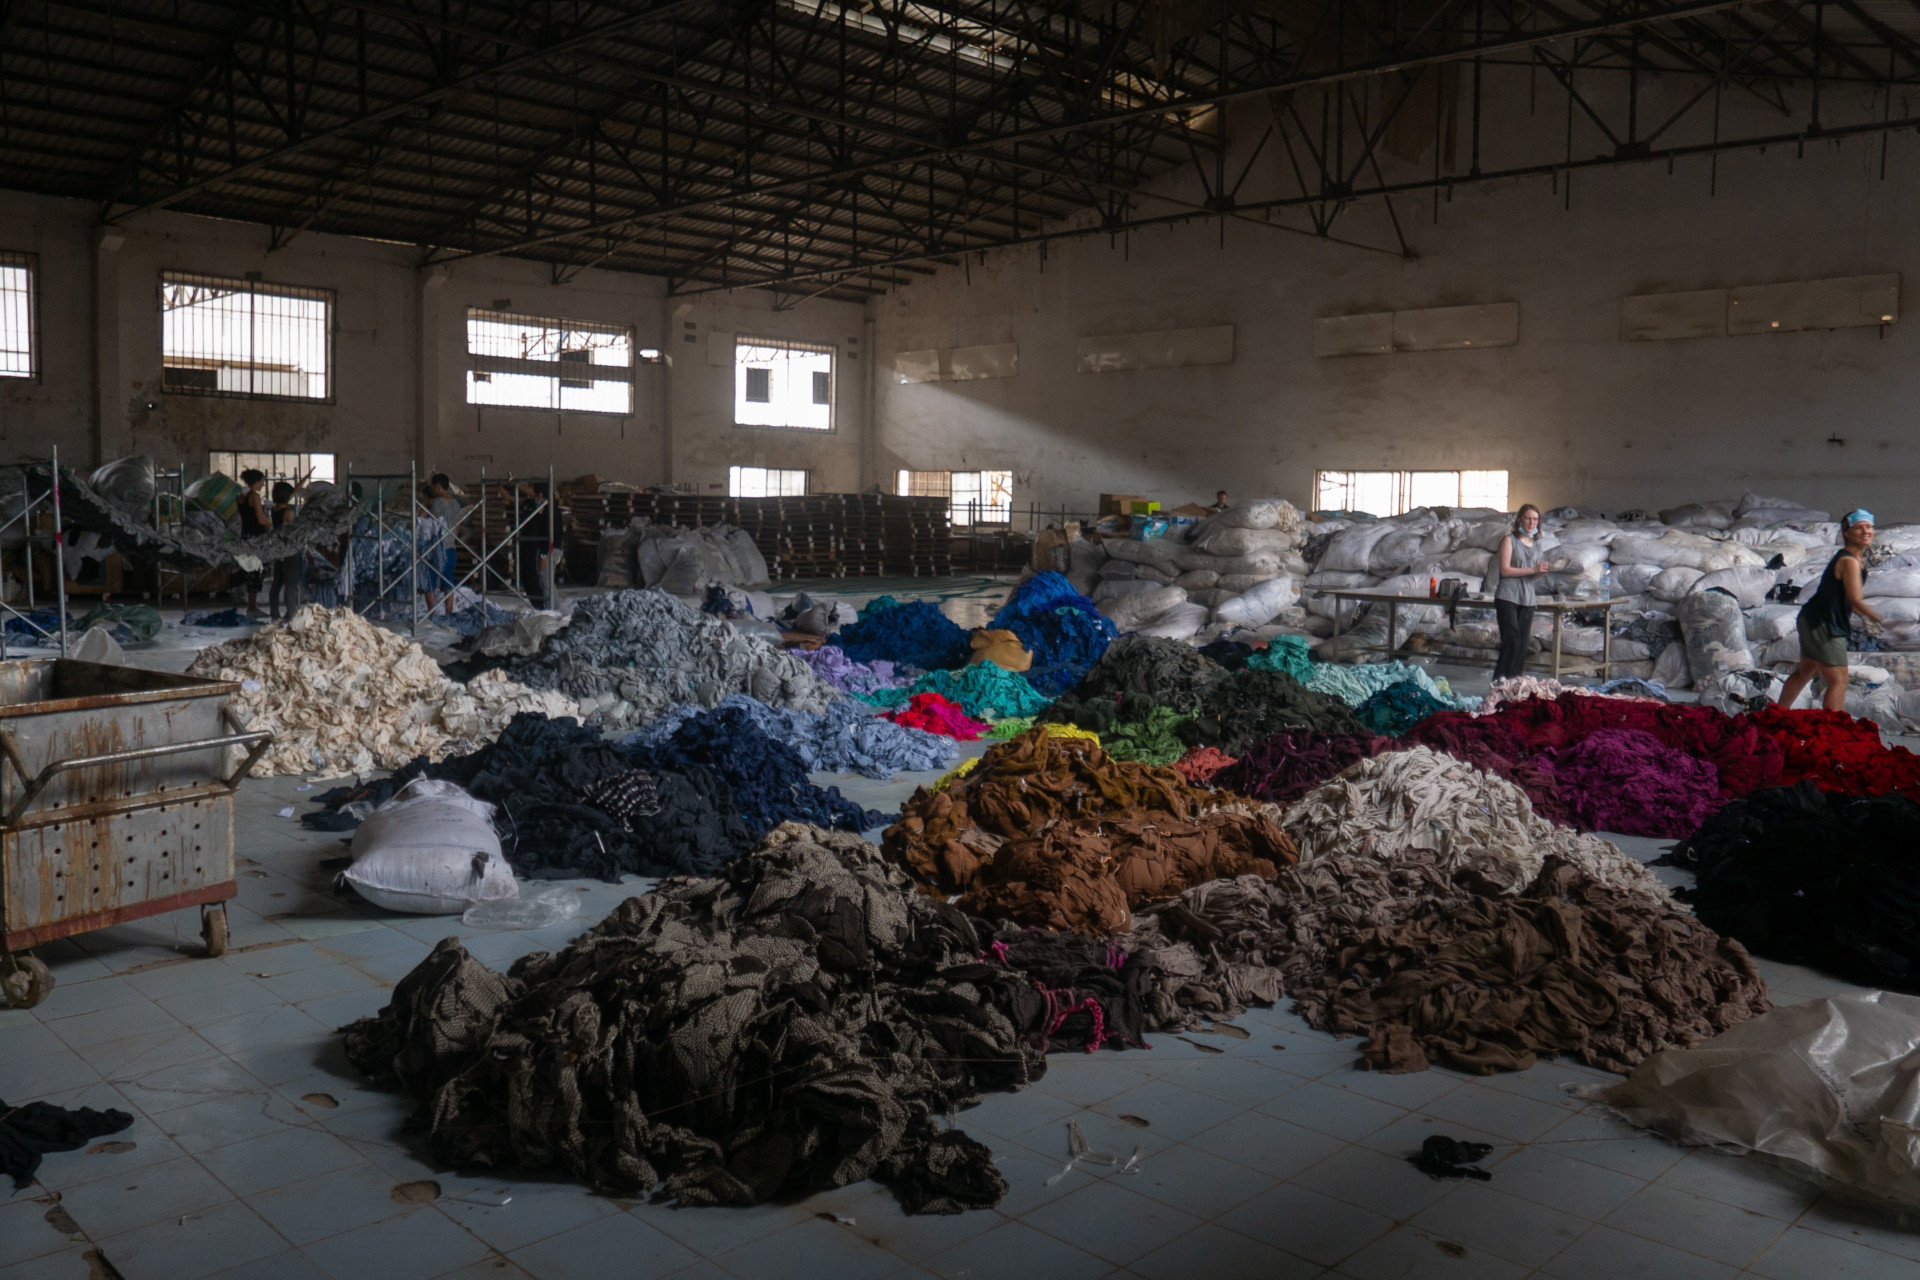 Warehouse with large piles of clothes on the floor